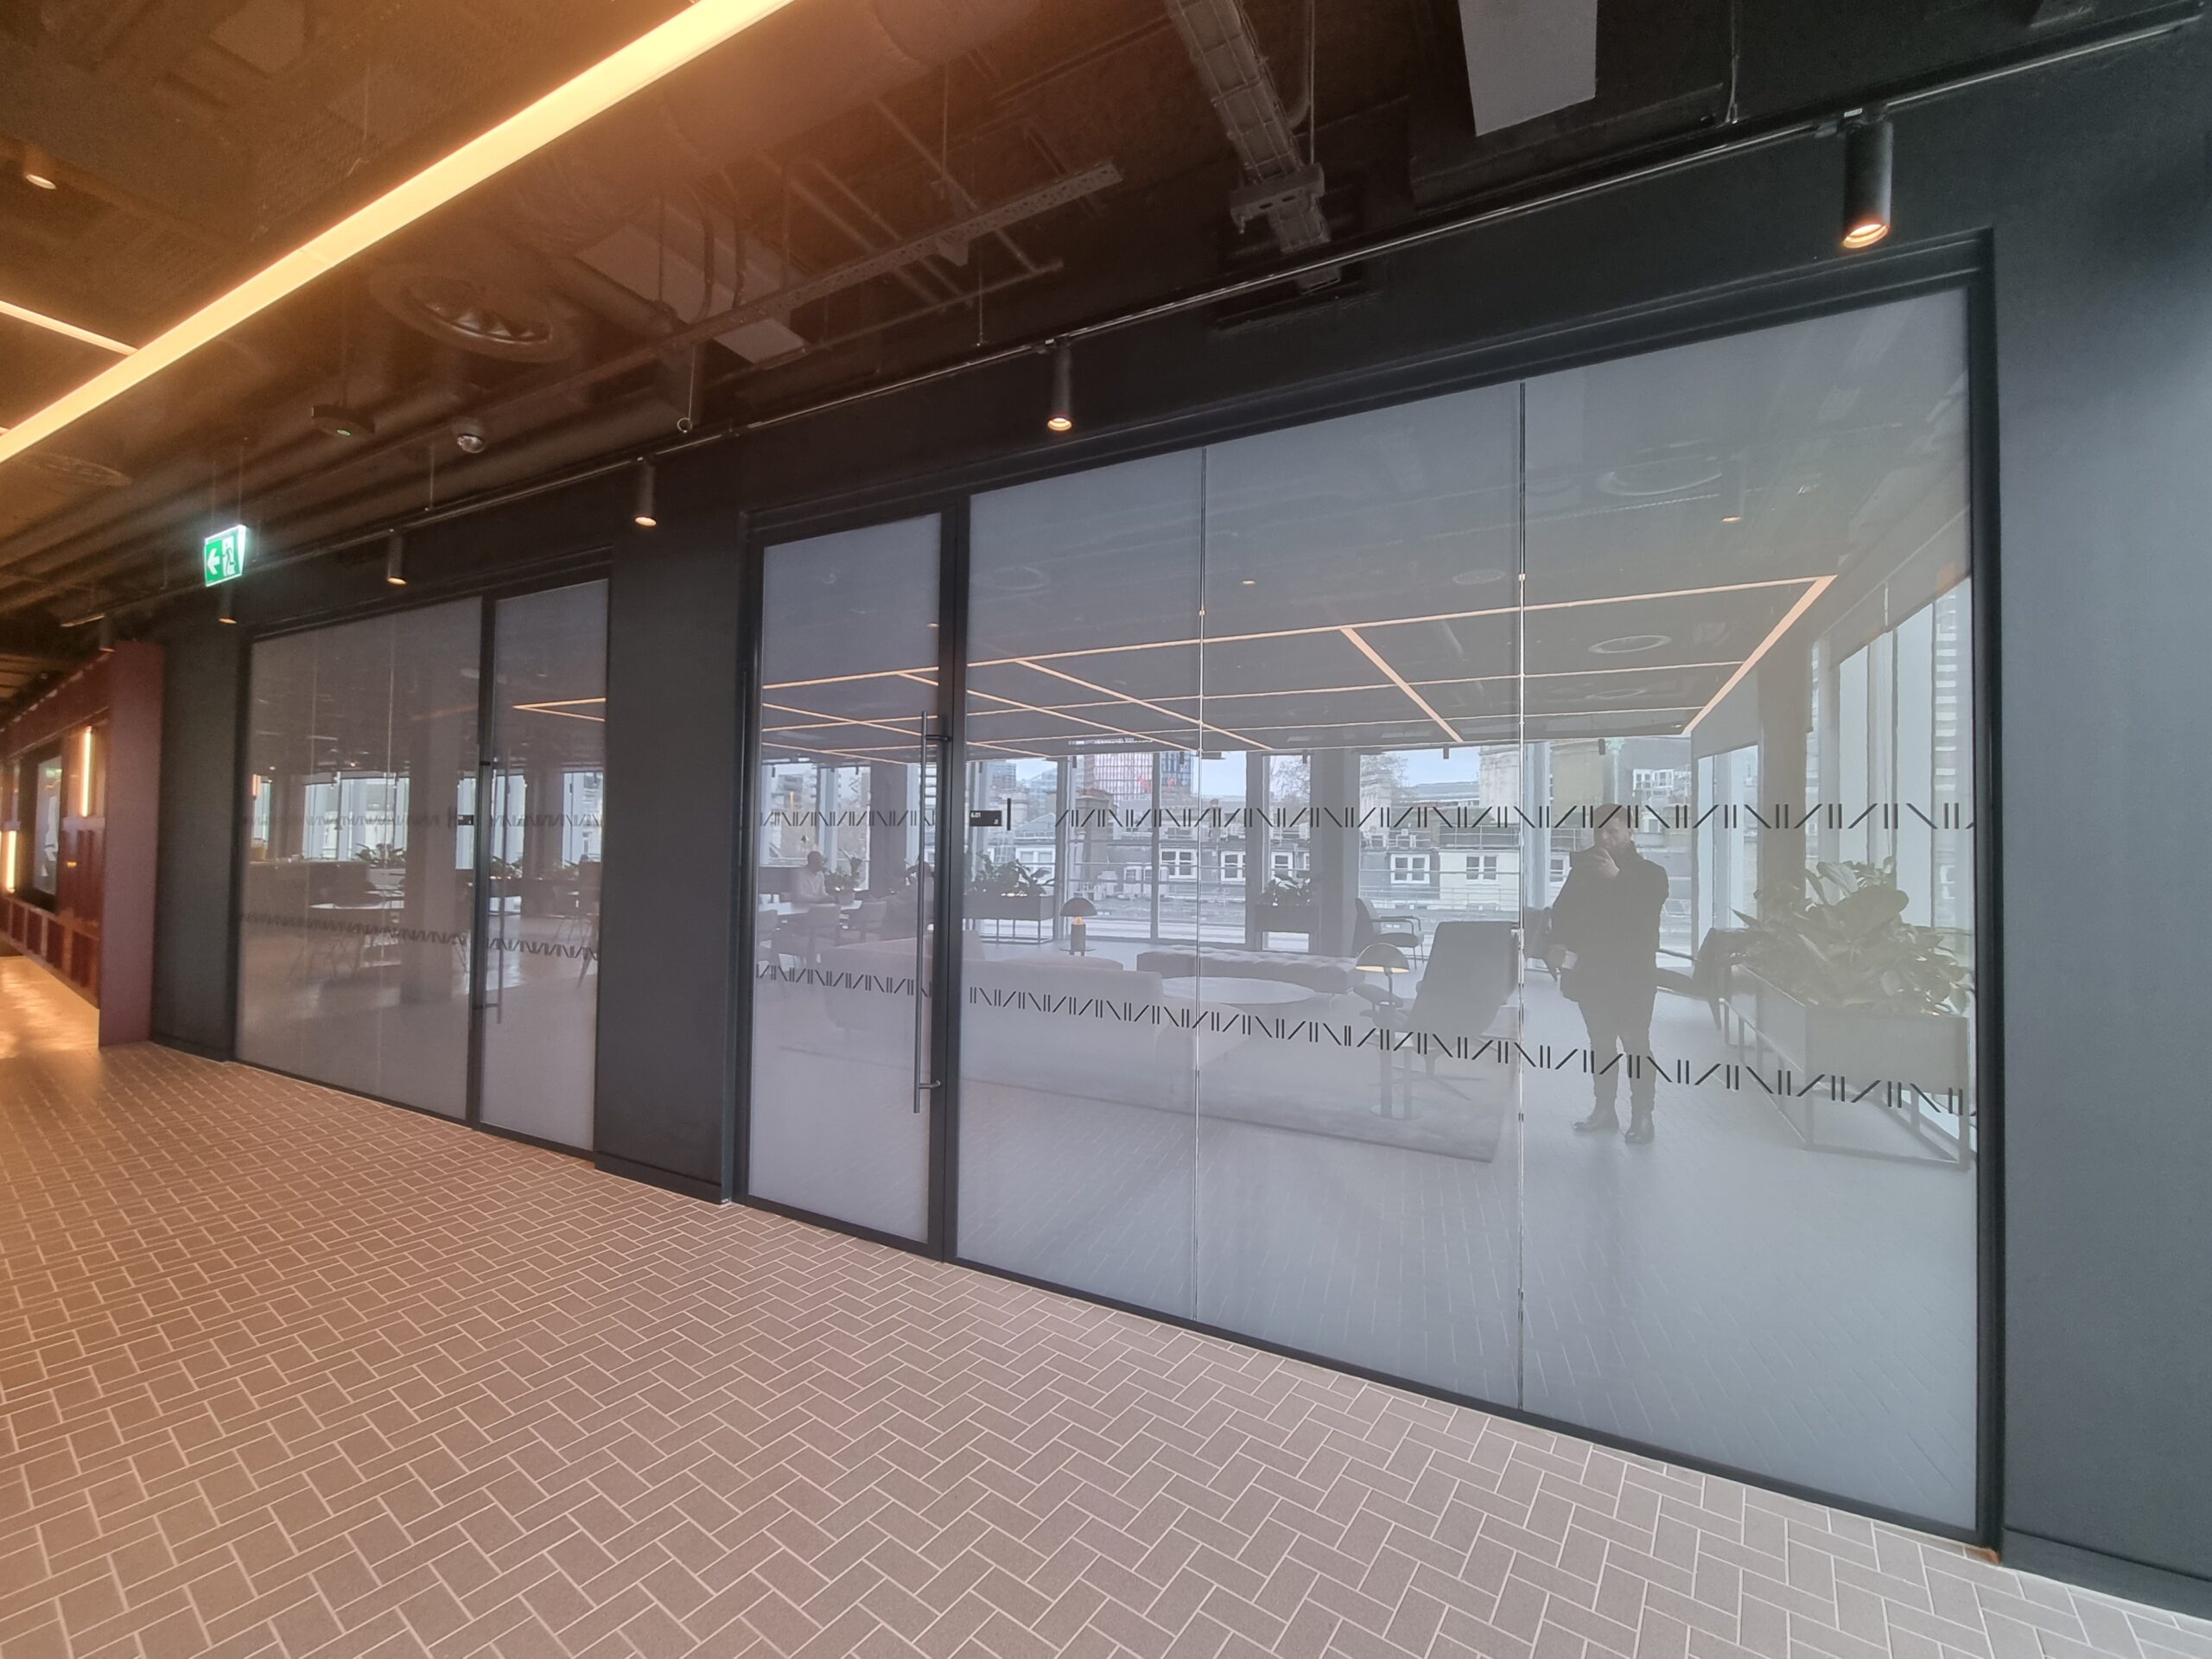 Switchable privacy glass transforms a London office into a stylish open-plan space to maximise natural light.